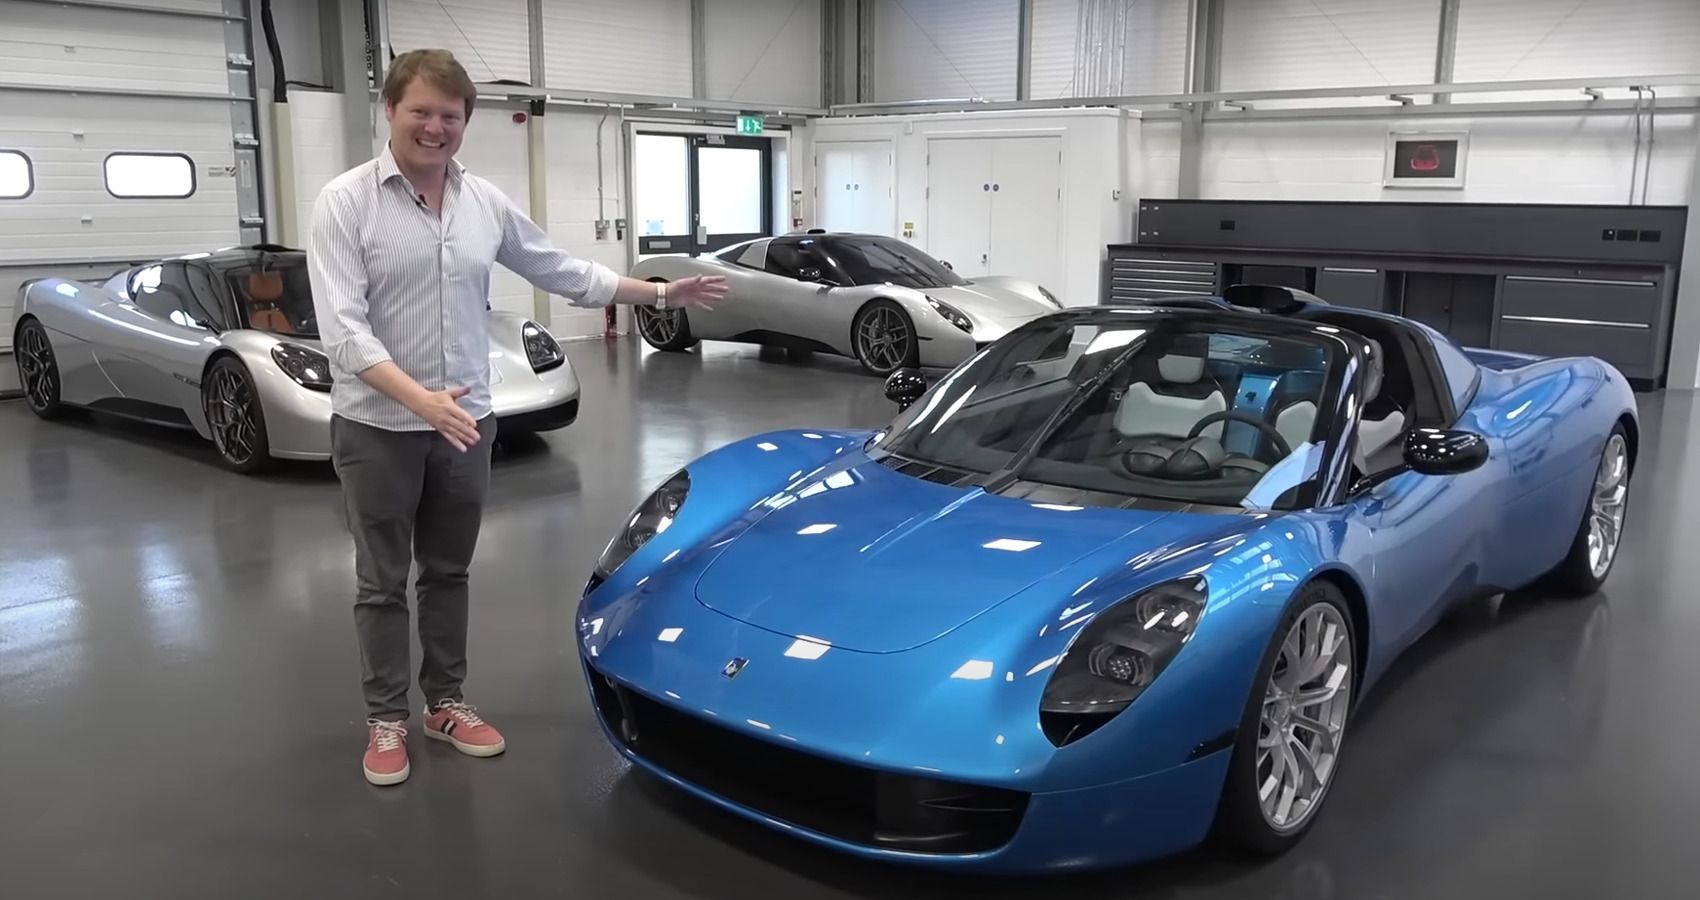 Shmee150 Introduces 2025 Blue GMA T33 Spider on his YouTube channel